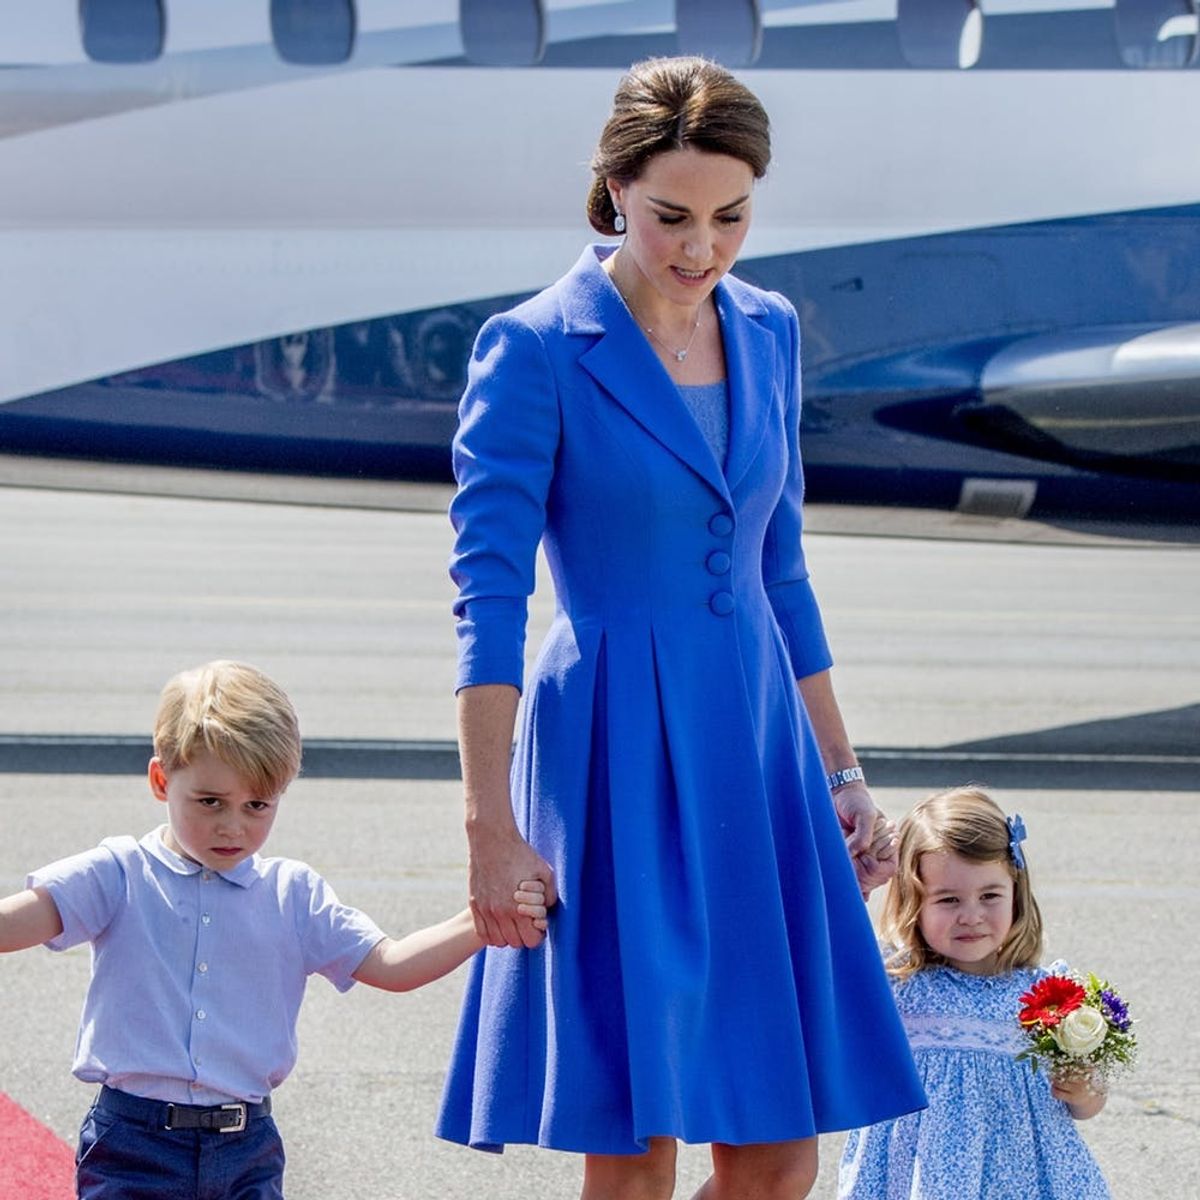 Prince George and Princess Charlotte Love Making This Food With Mom Kate Middleton